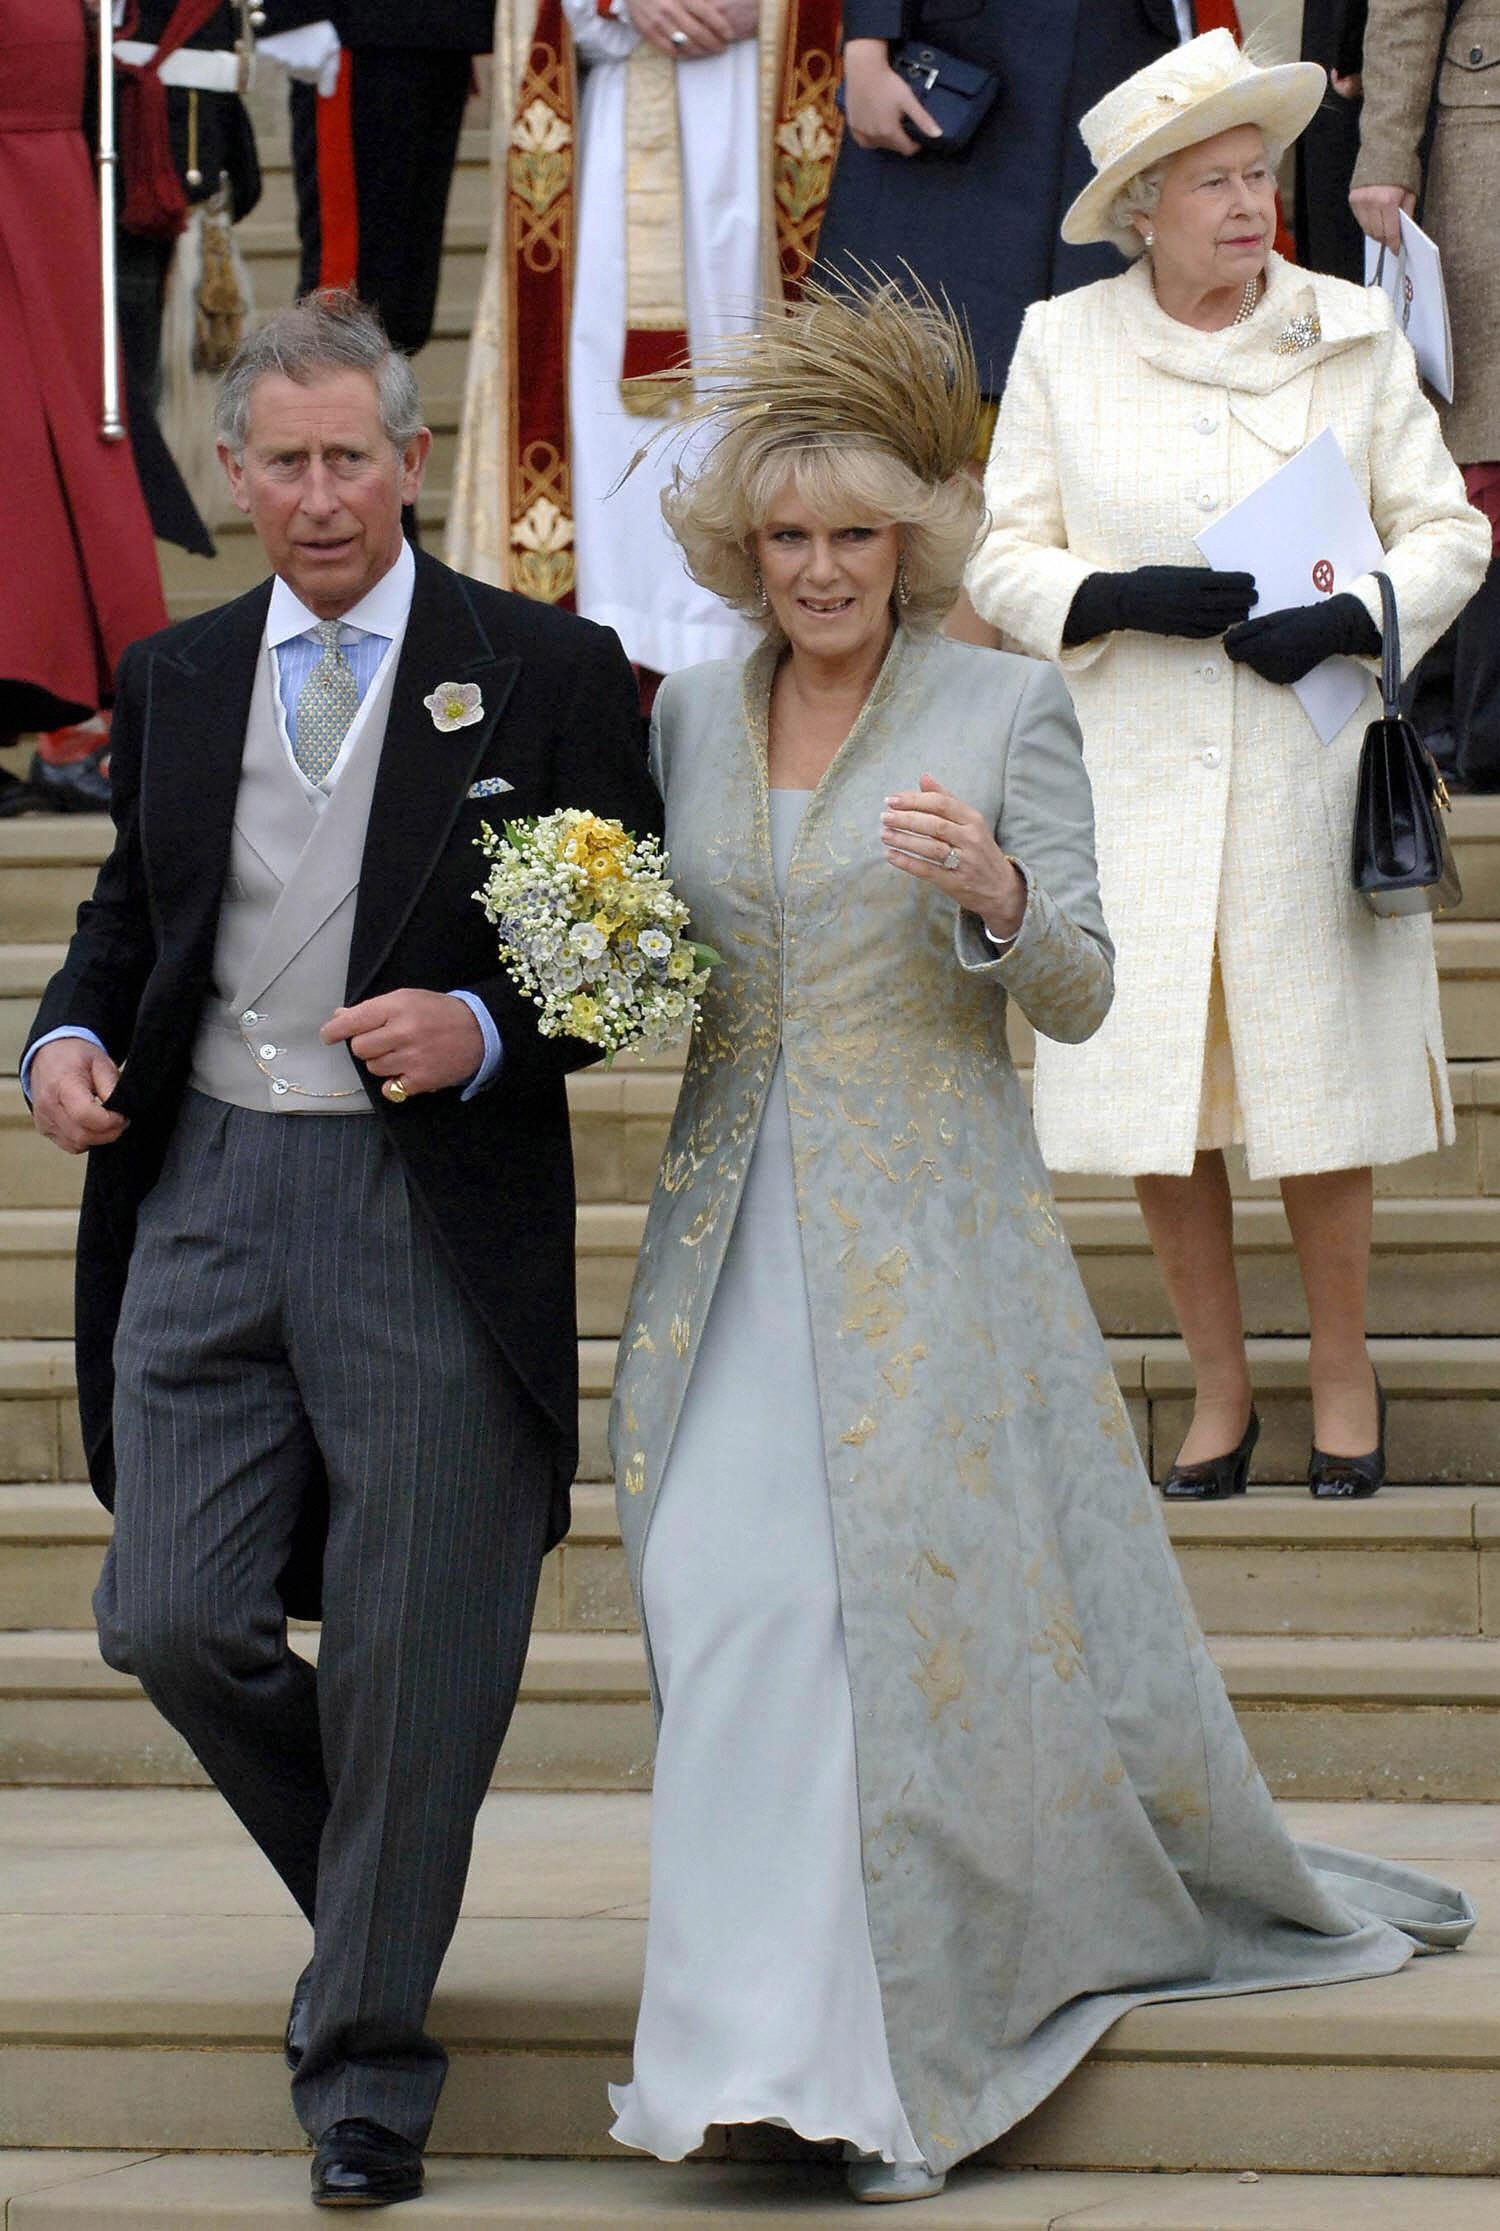 Queen Elizabeth II pictured behind Prince Charles and his wife Camilla Duchess of Cornwall walking down the steps of St. George's Chapel in Windsor following the church blessing of their civil wedding ceremony, 09 April 2005 | Source: Getty Images